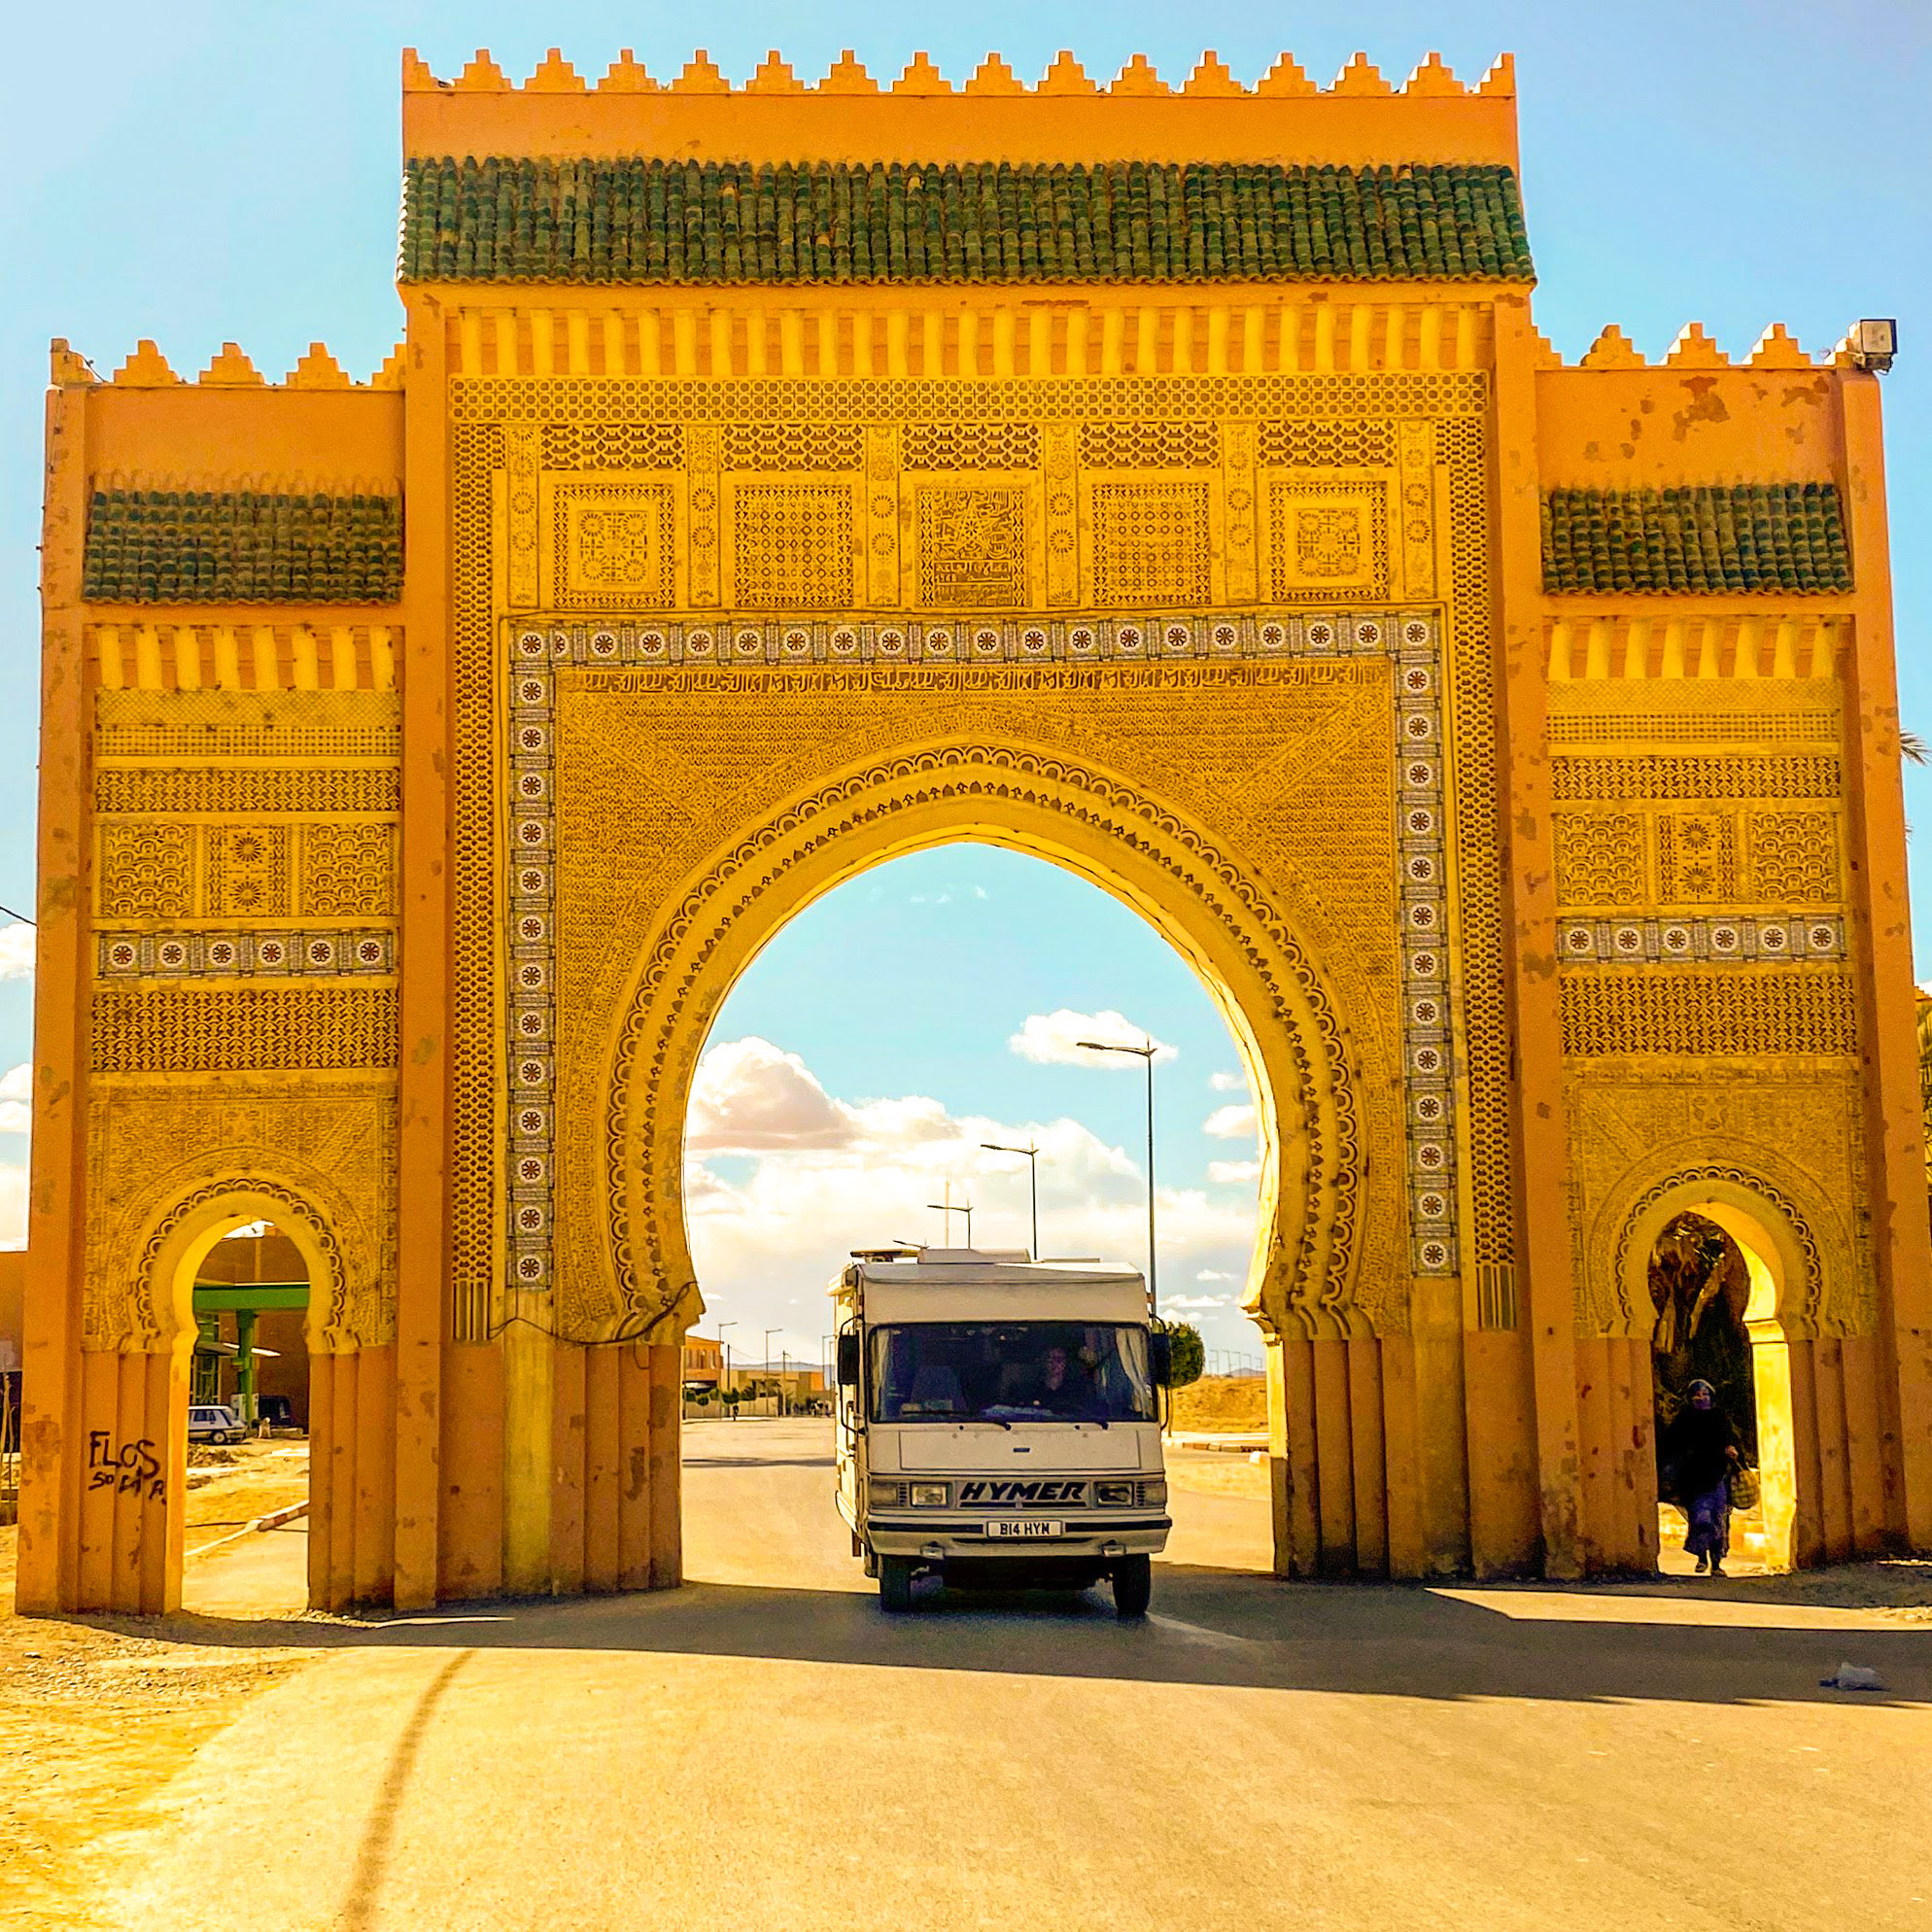 Classic Hymer motorhome driving through ornate entrance gate at the town of Tazzarine, Morocco